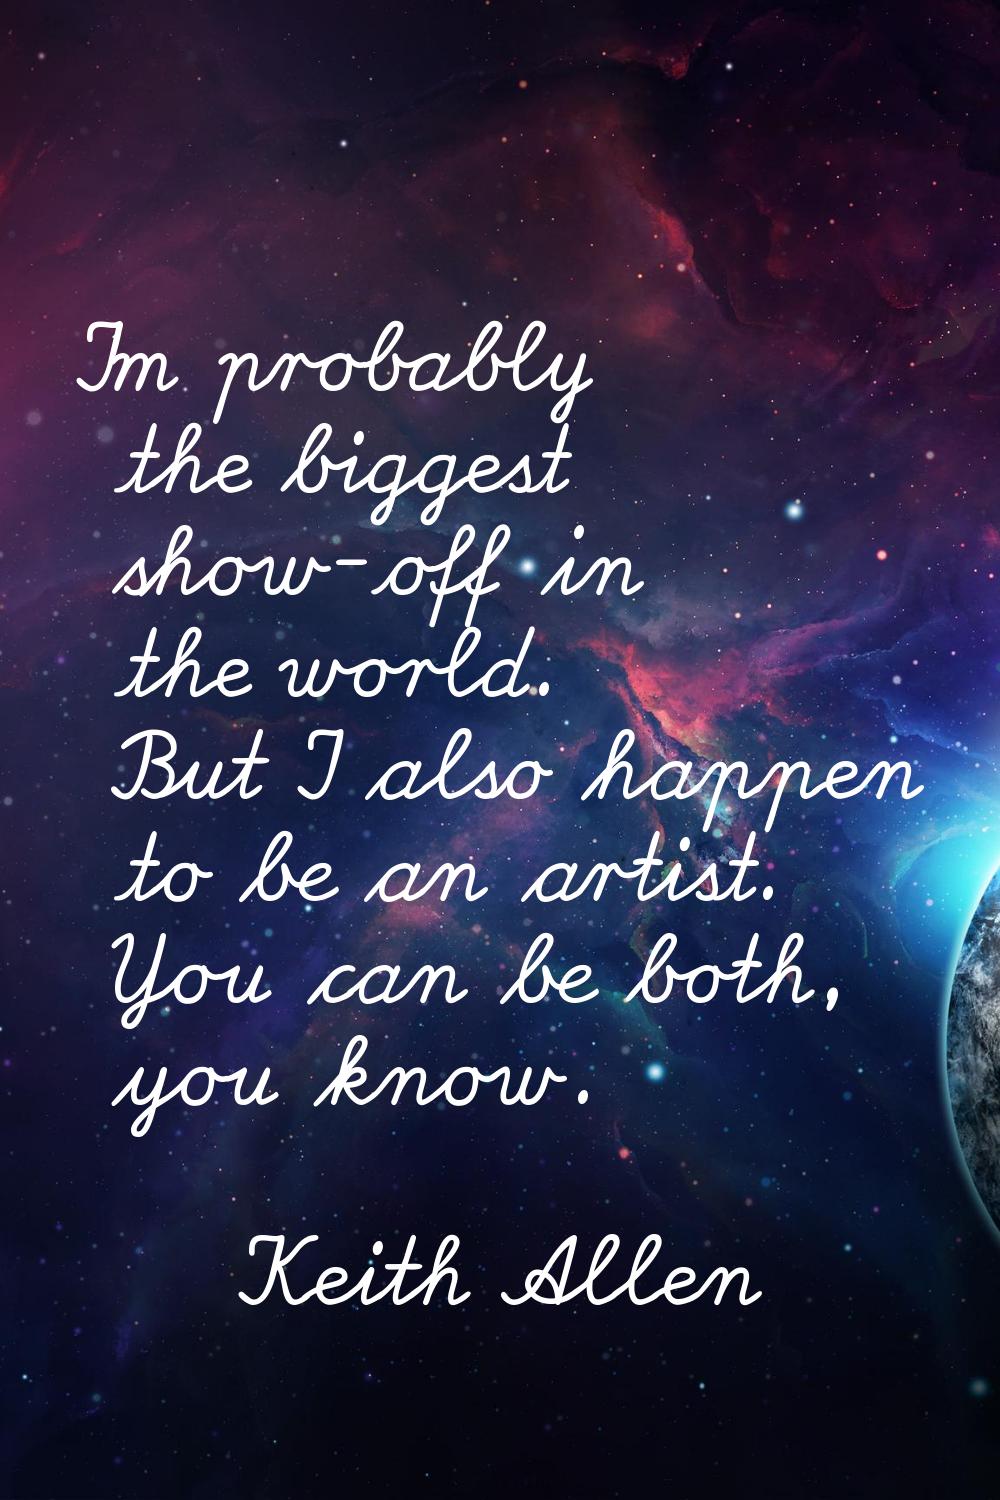 I'm probably the biggest show-off in the world. But I also happen to be an artist. You can be both,